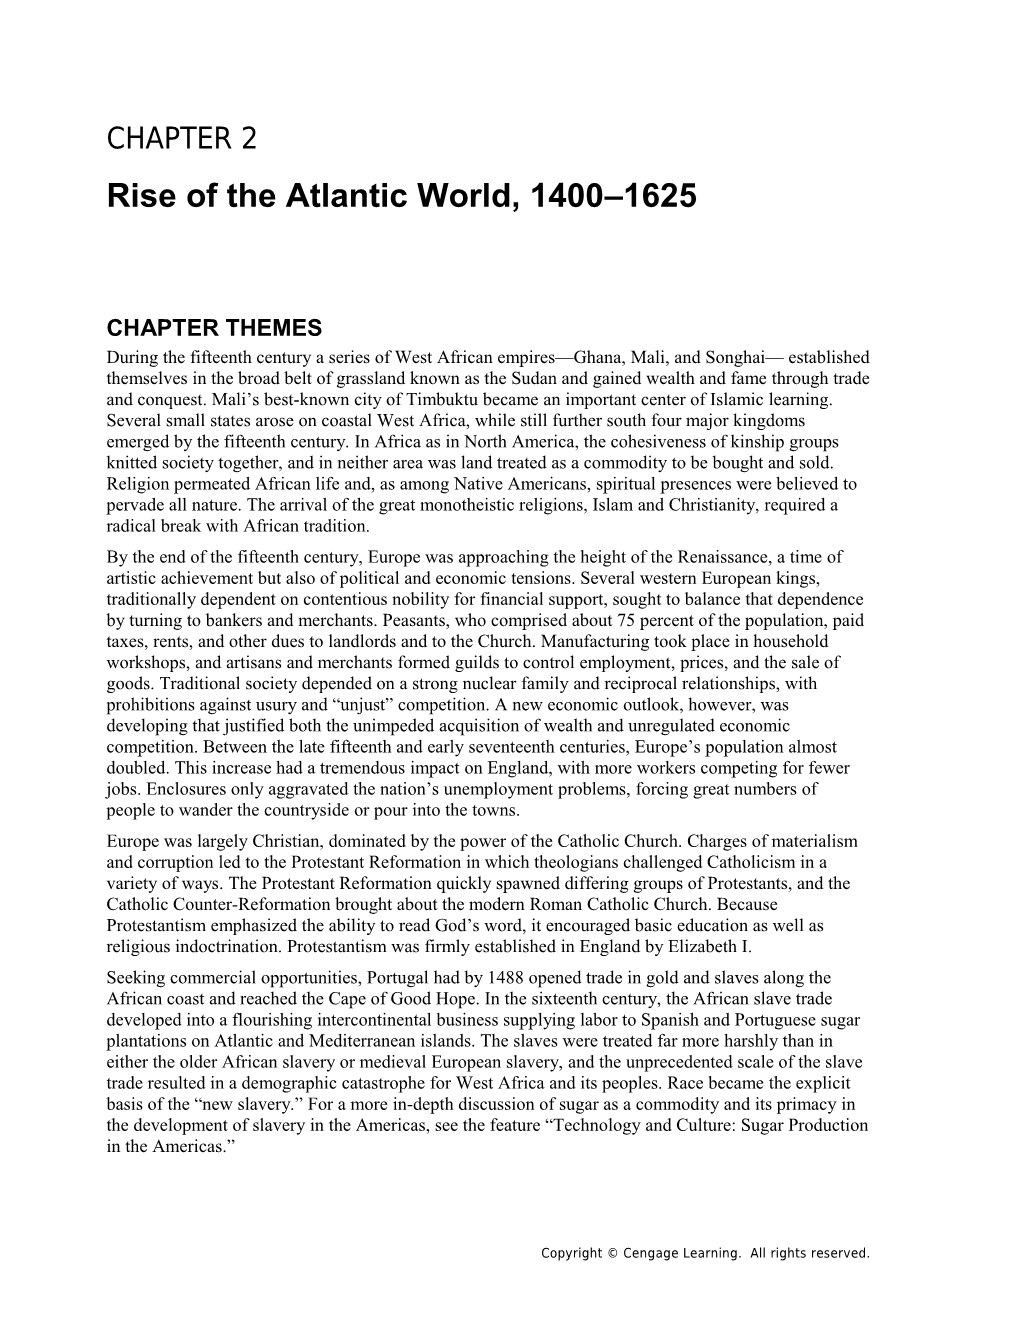 Chapter 2: Rise of the Atlantic World, 1400 1625 59